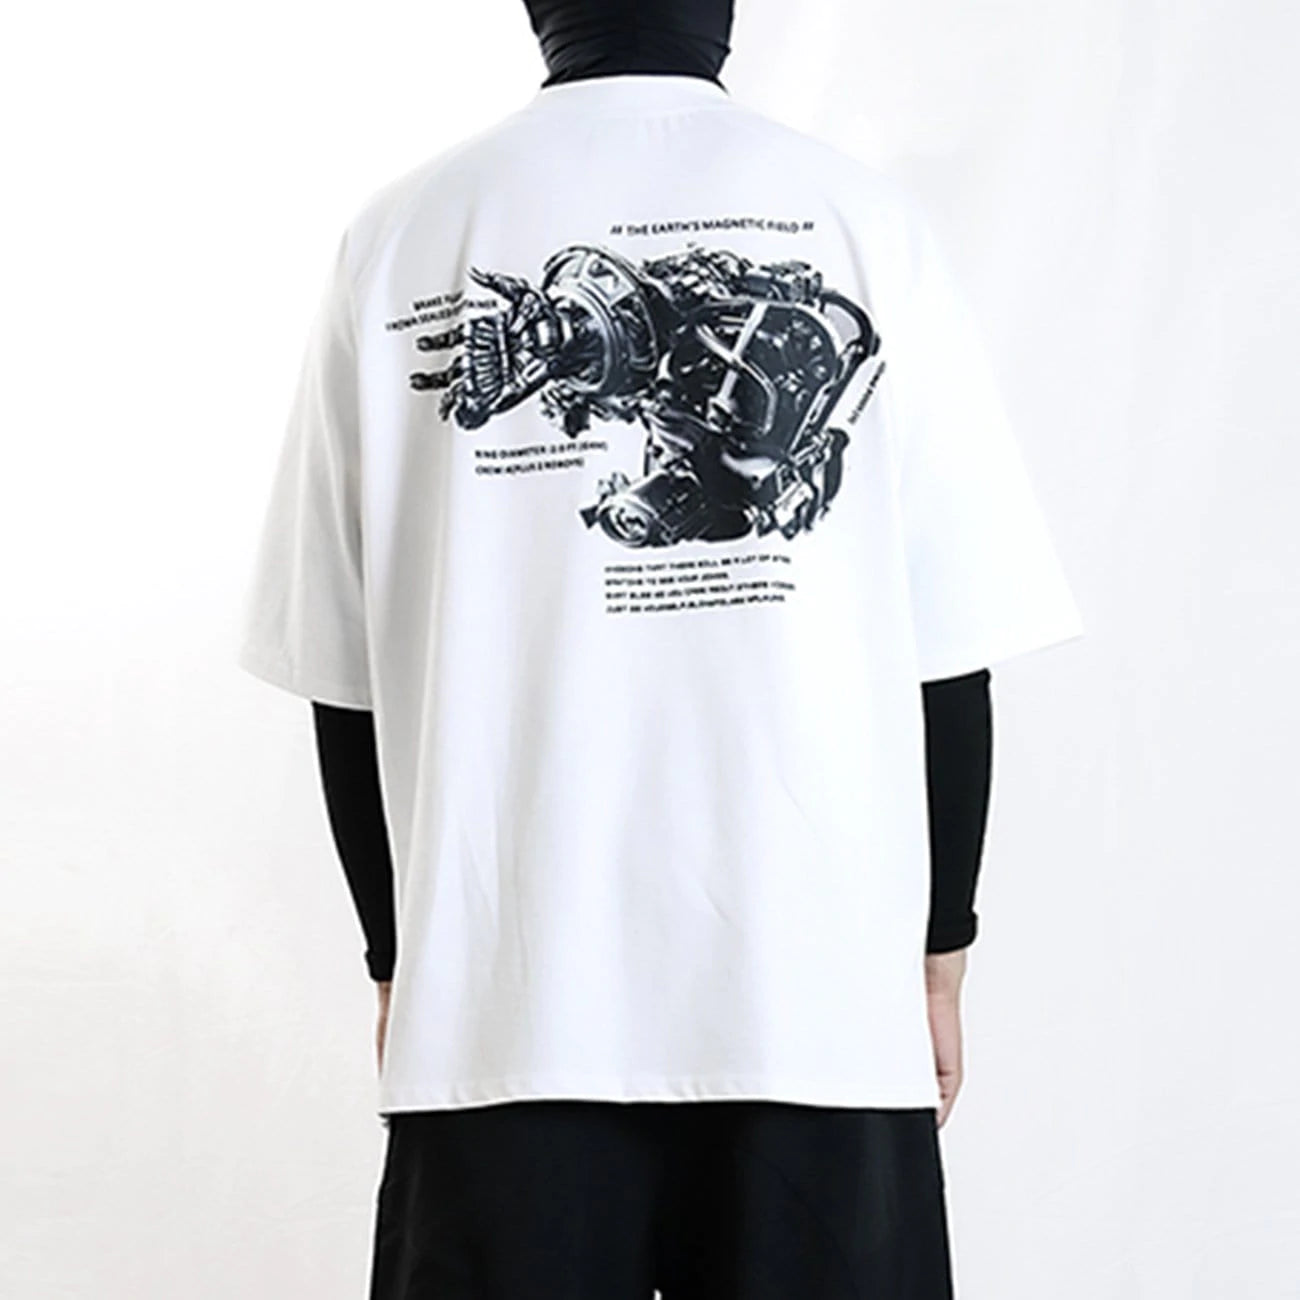 TO Three-dimensional Armed Mech Graphic Tee